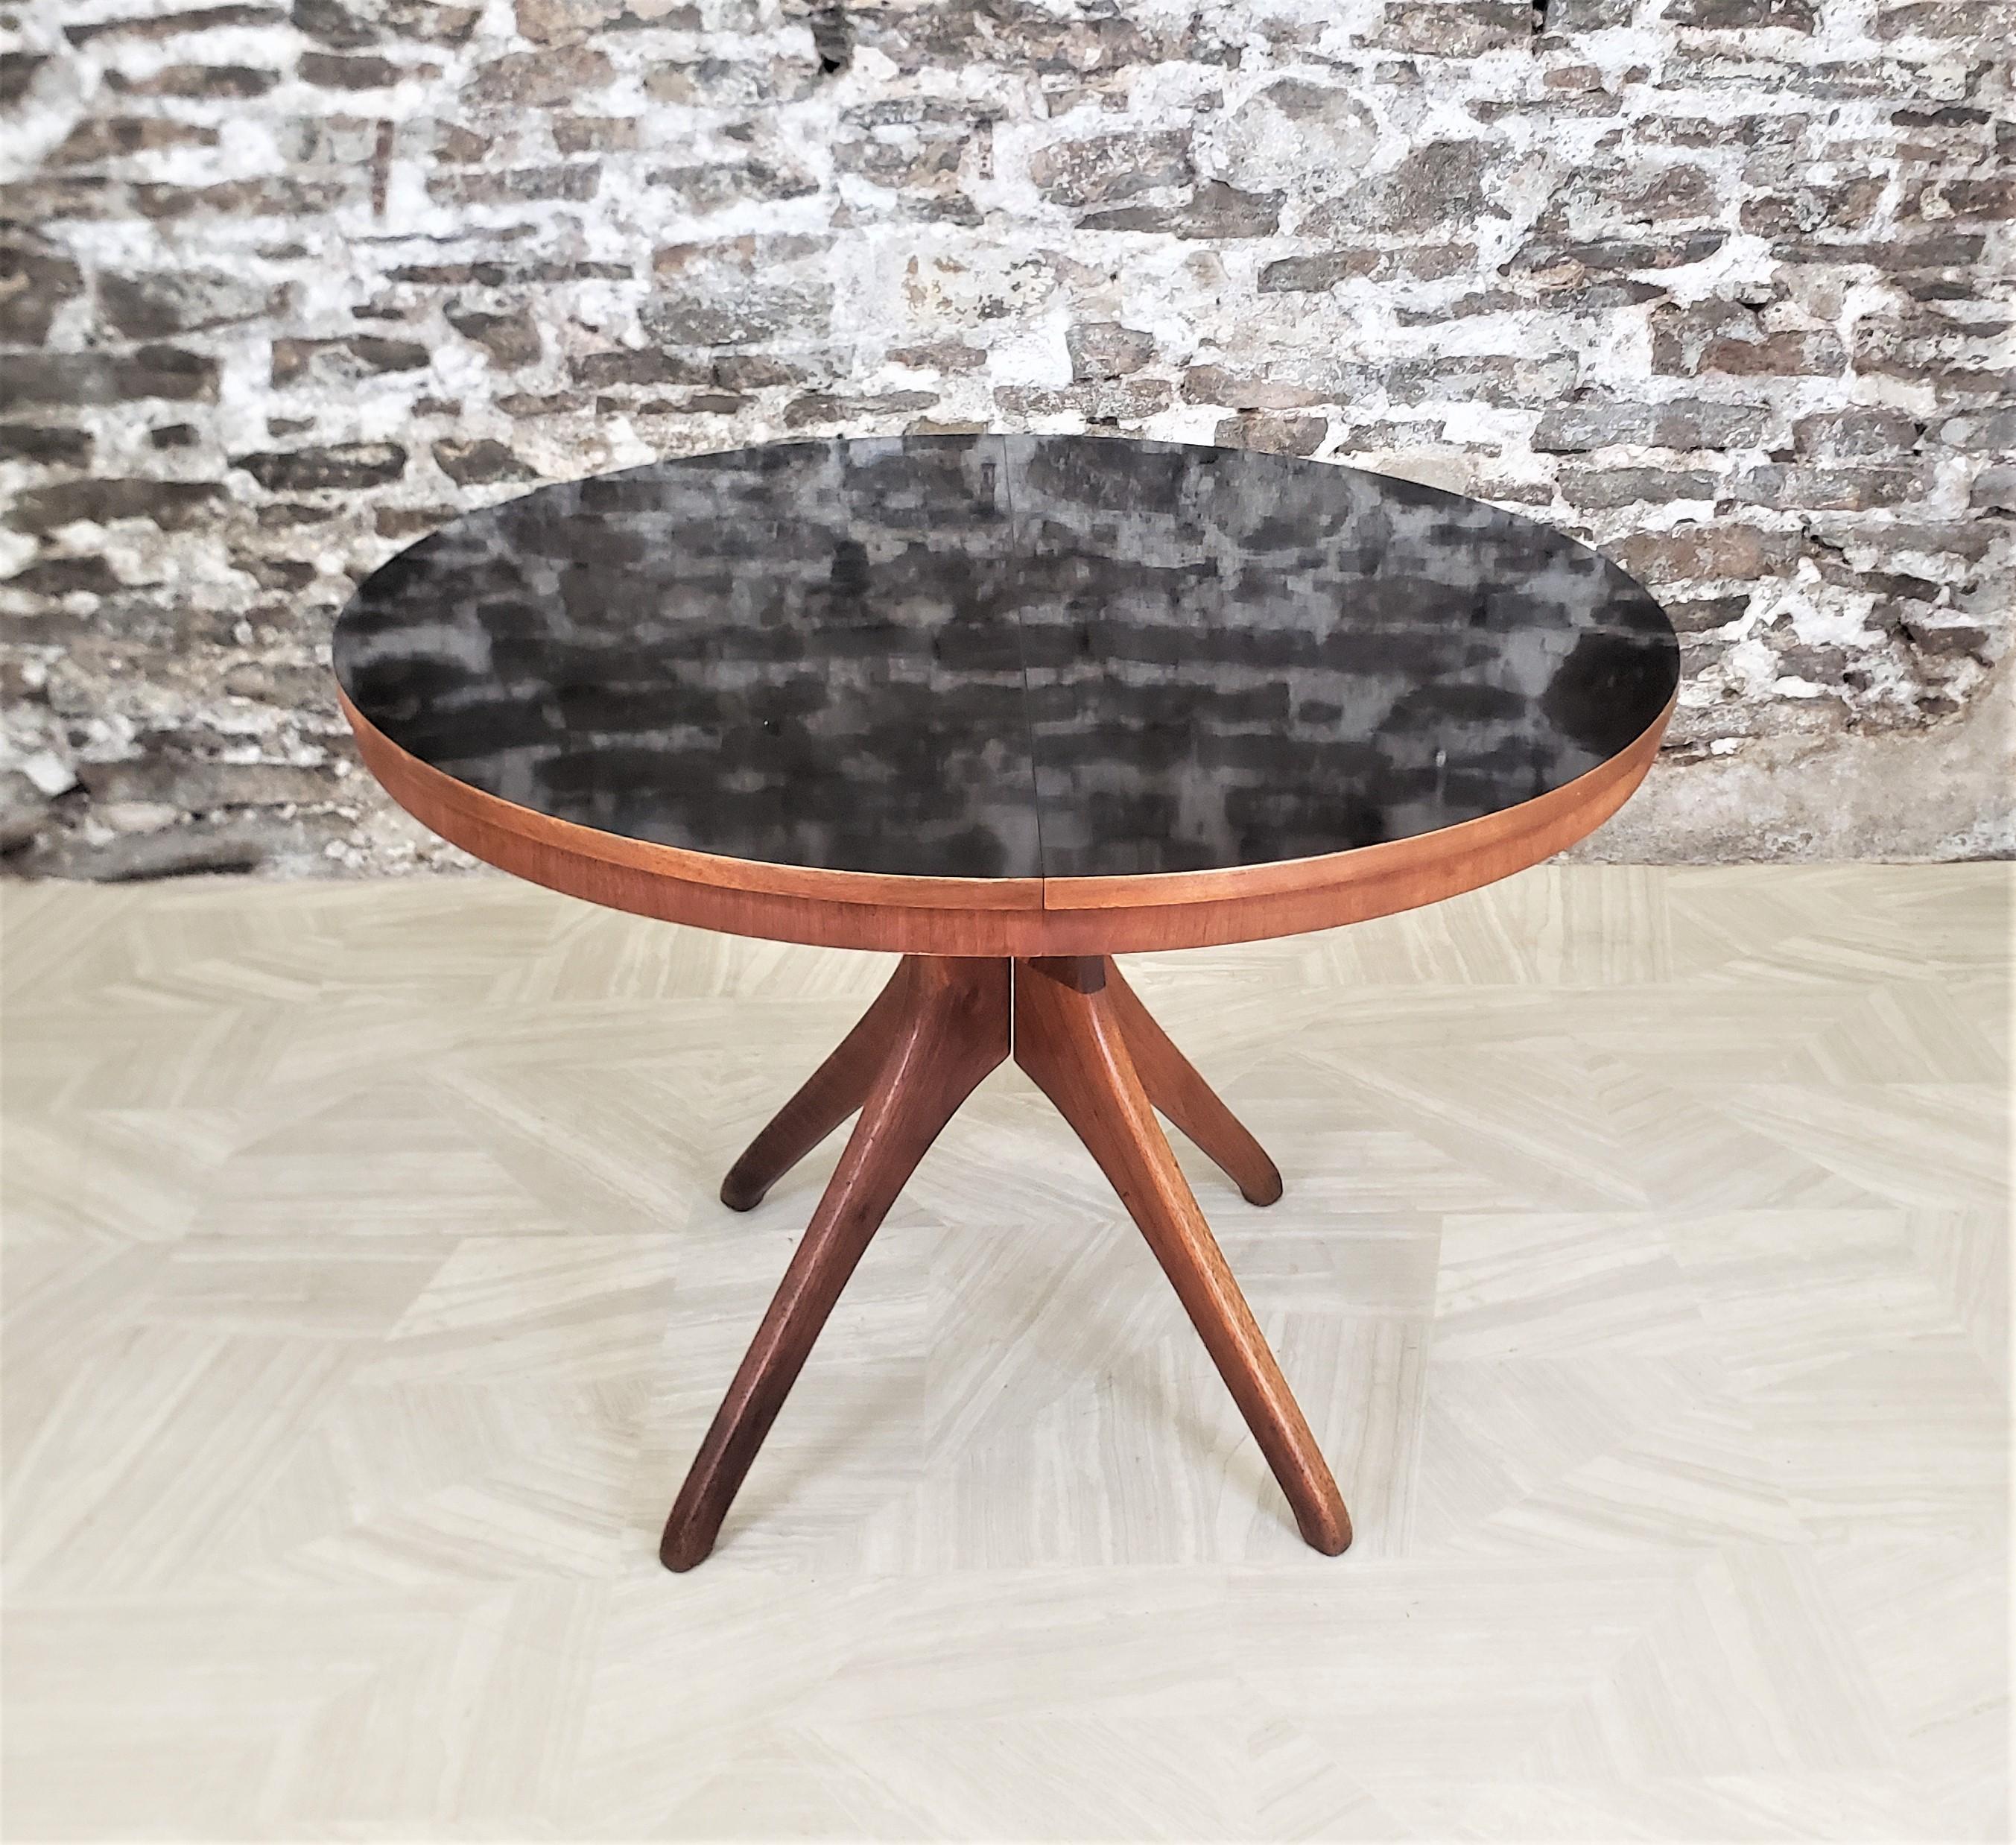 This round or oval, with the leaf, dining table is unsigned, but presumed to have originated from Finland and date to approximately 1950 and done in the period Mid-Century Modern style. The table is composed of teak with a black arborite inset top.